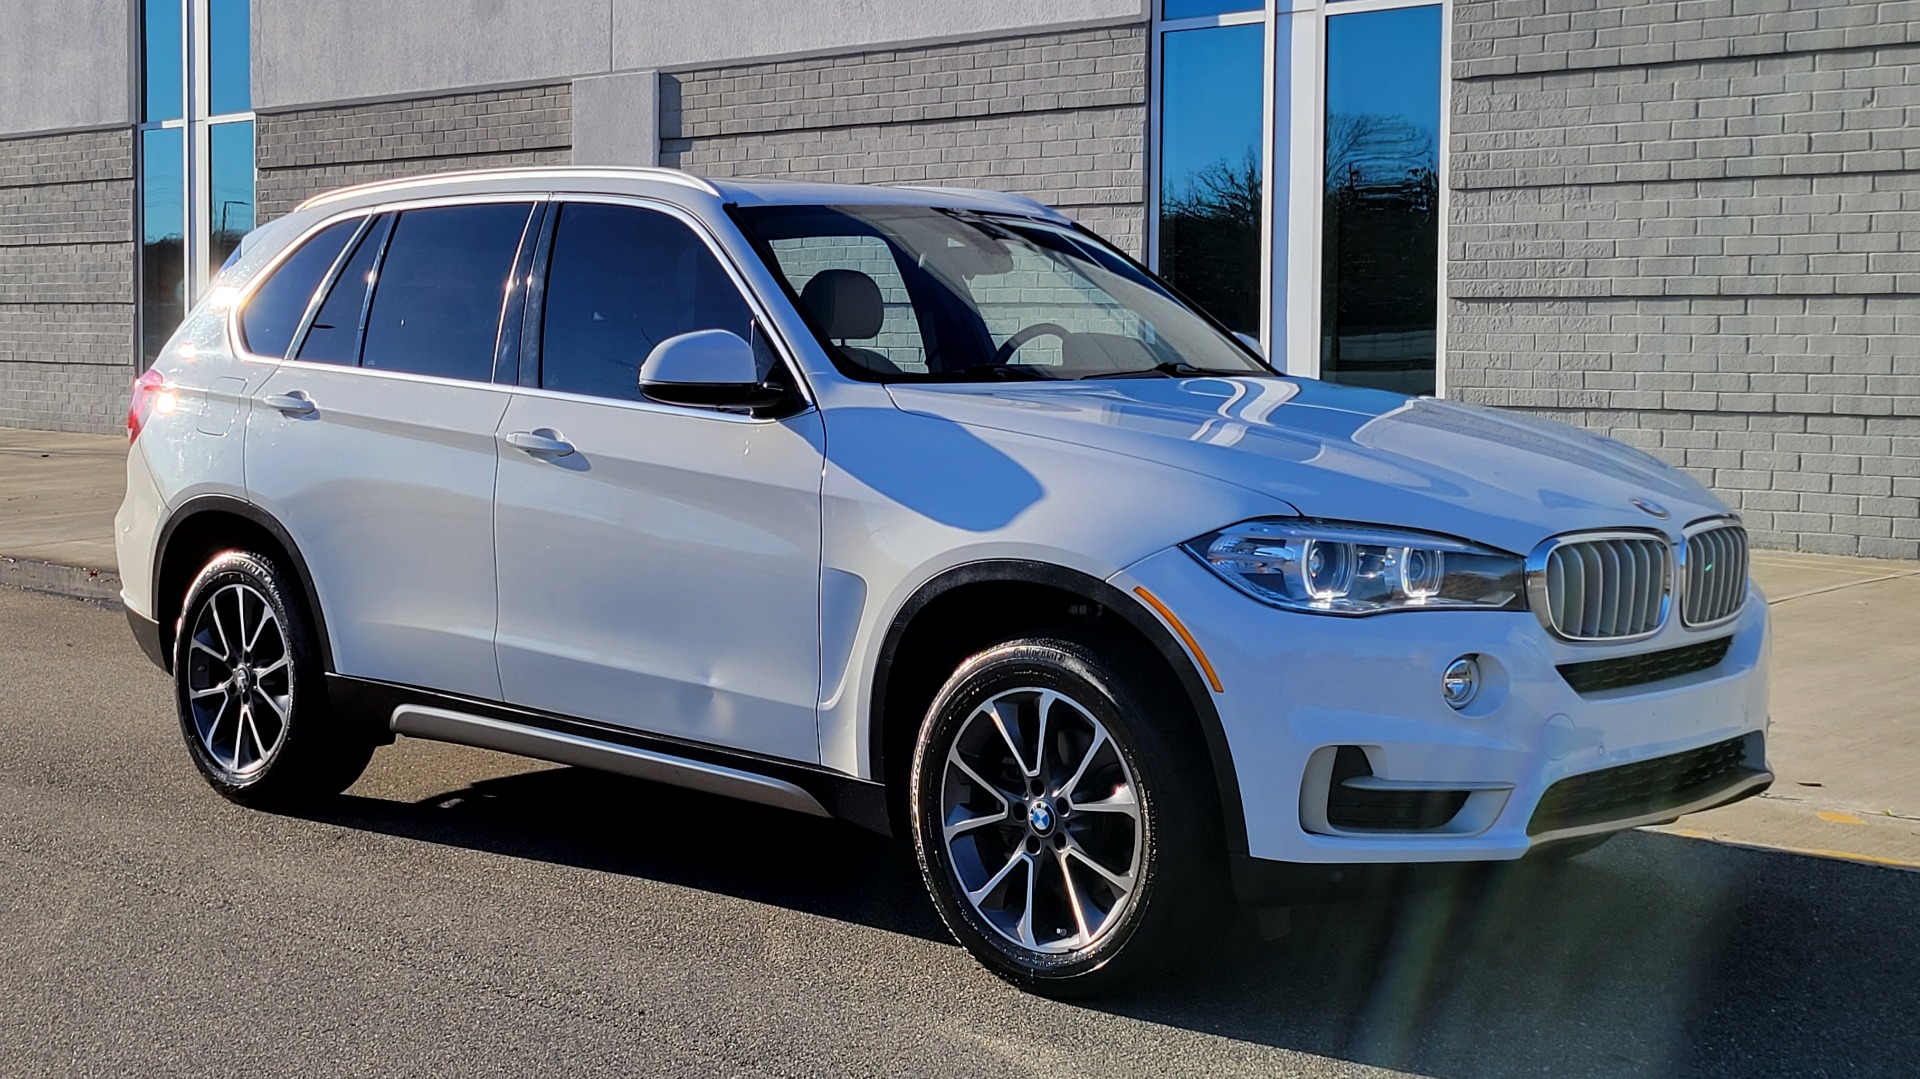 Used 2018 BMW X5 XDRIVE35I PREMIUM / DRVR ASST / HUD / WIRELESS CHARGING / HEATED SEATS for sale Sold at Formula Imports in Charlotte NC 28227 6